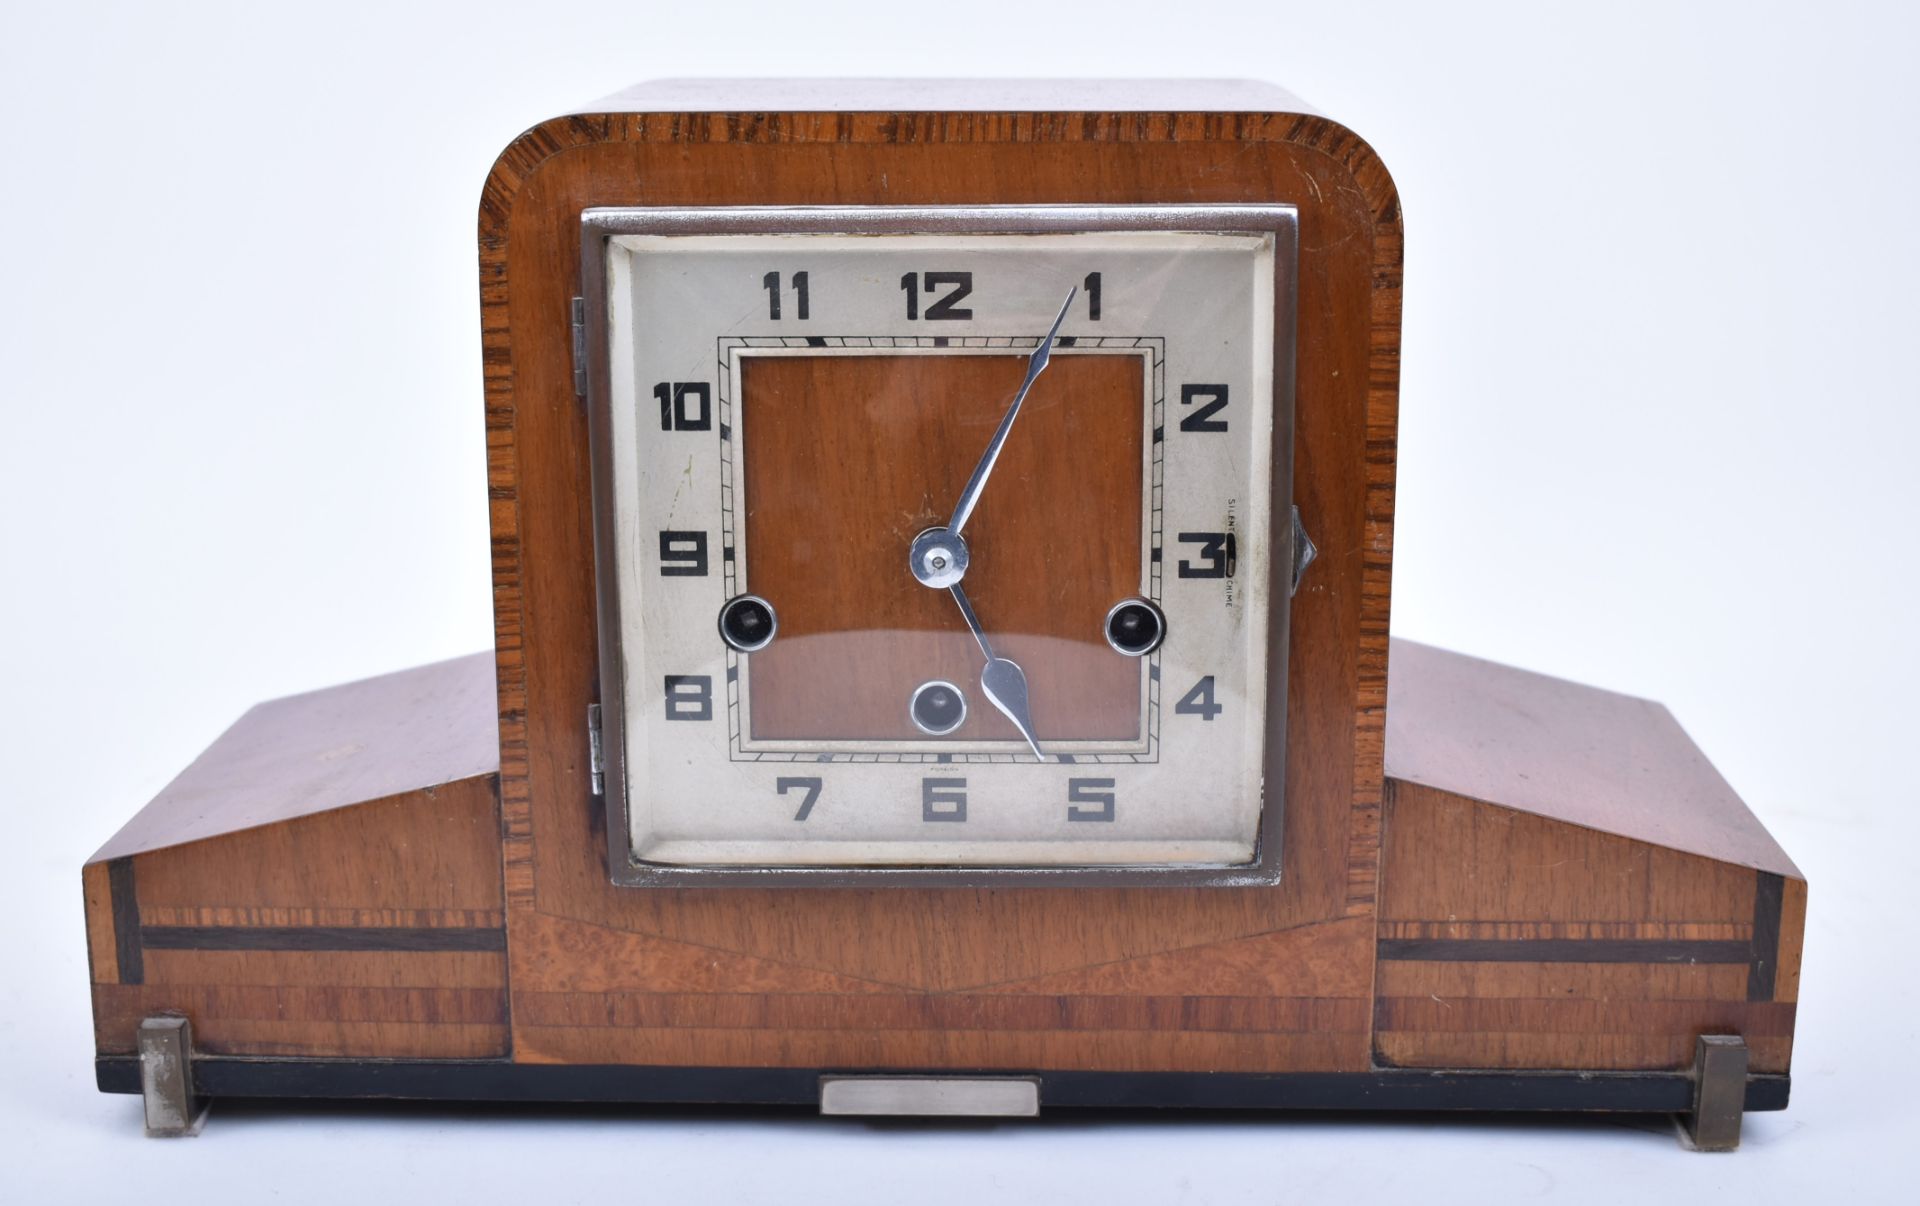 ART DECO STYLE WESTMINSTER CHIME WALNUT MANTEL CLOCK - Image 2 of 8